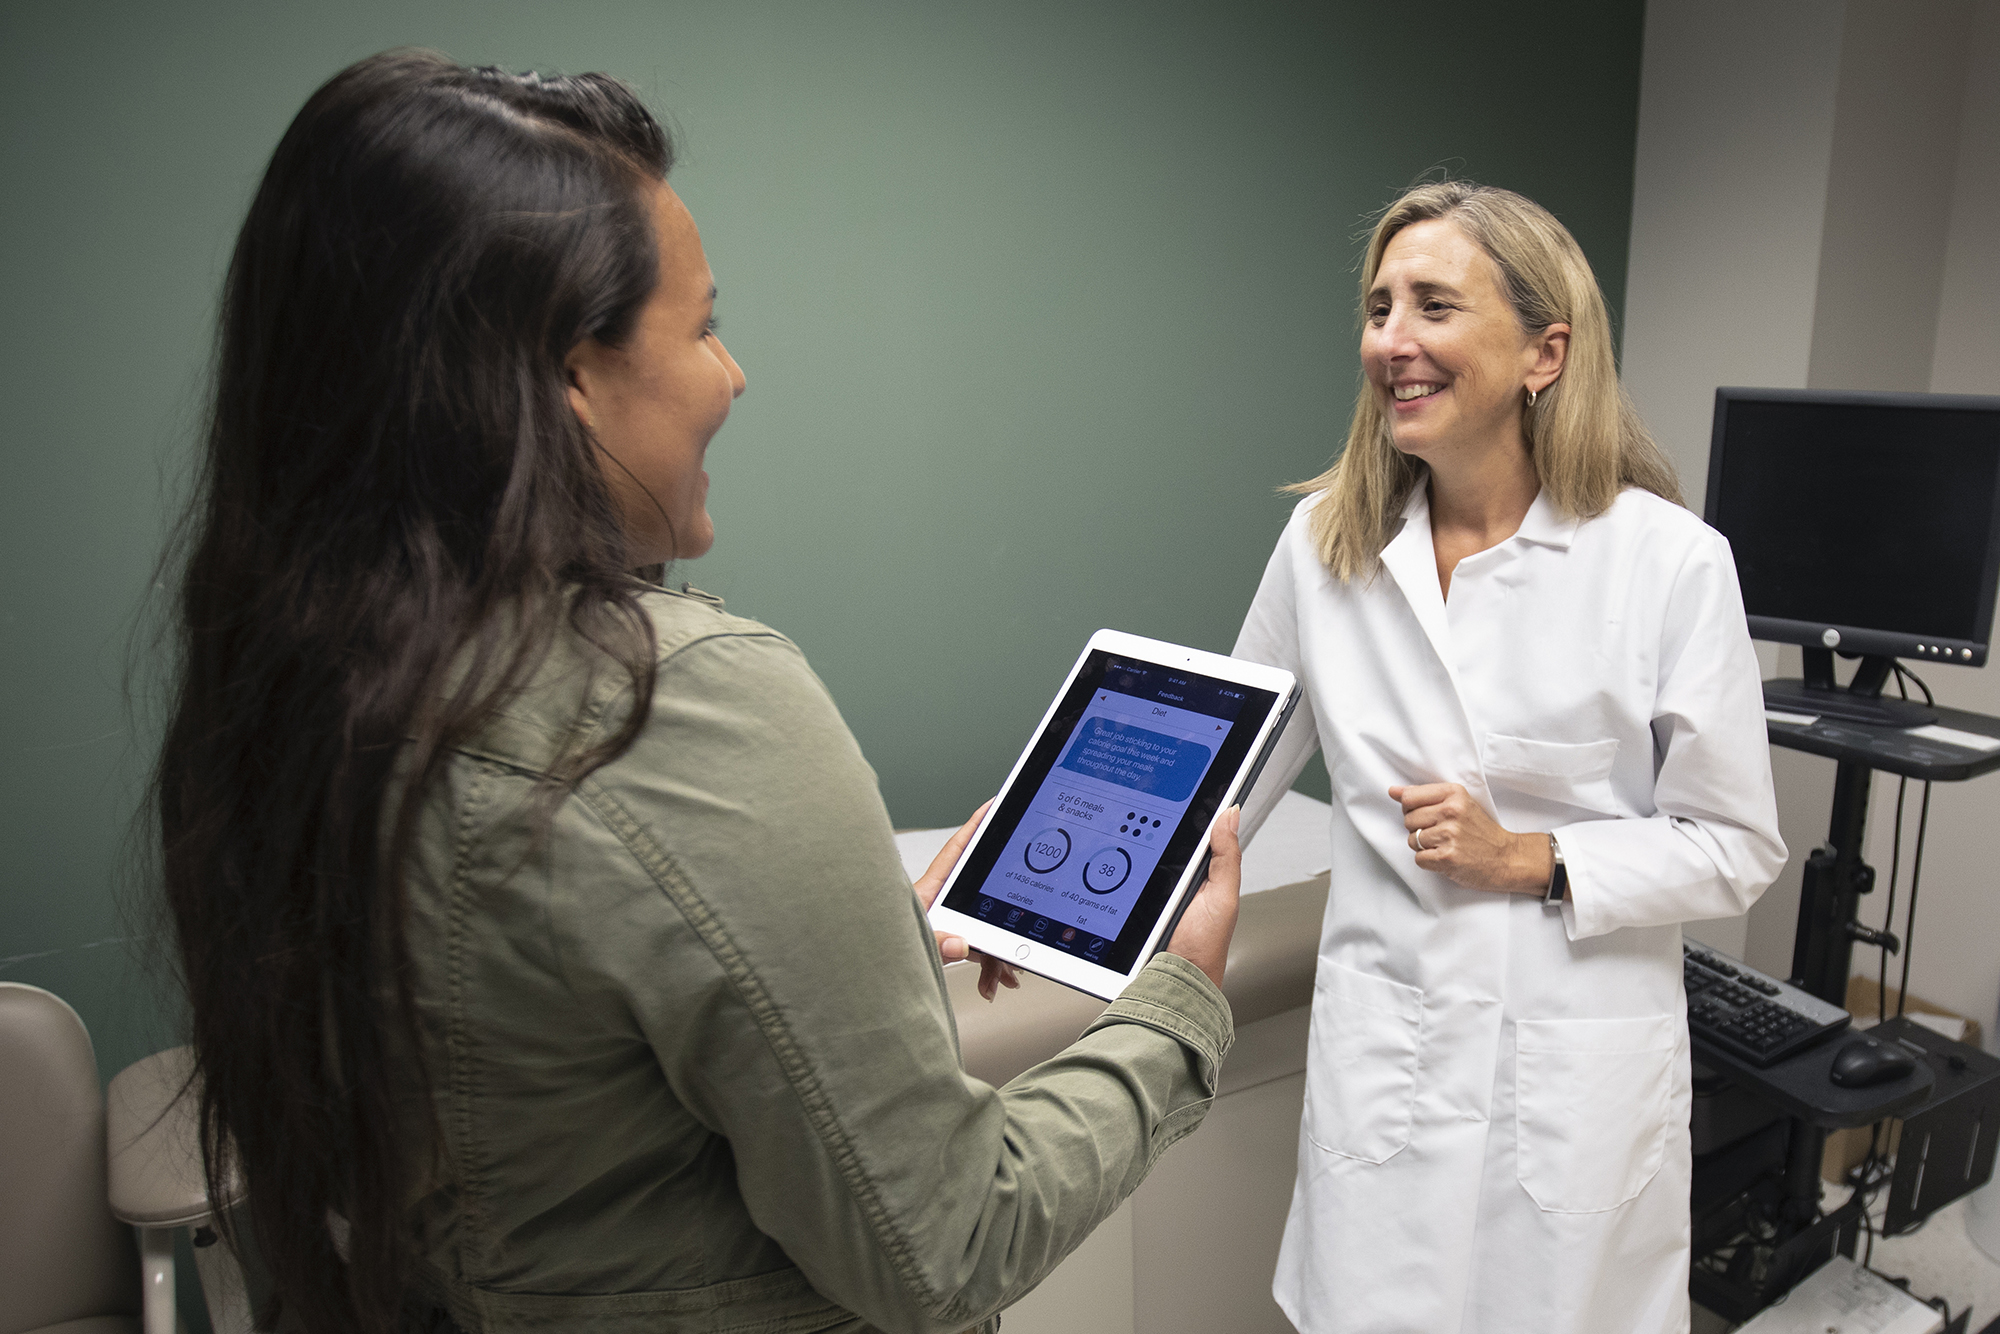 Doctor talks to a patient while they hold an iPad, displaying an app.